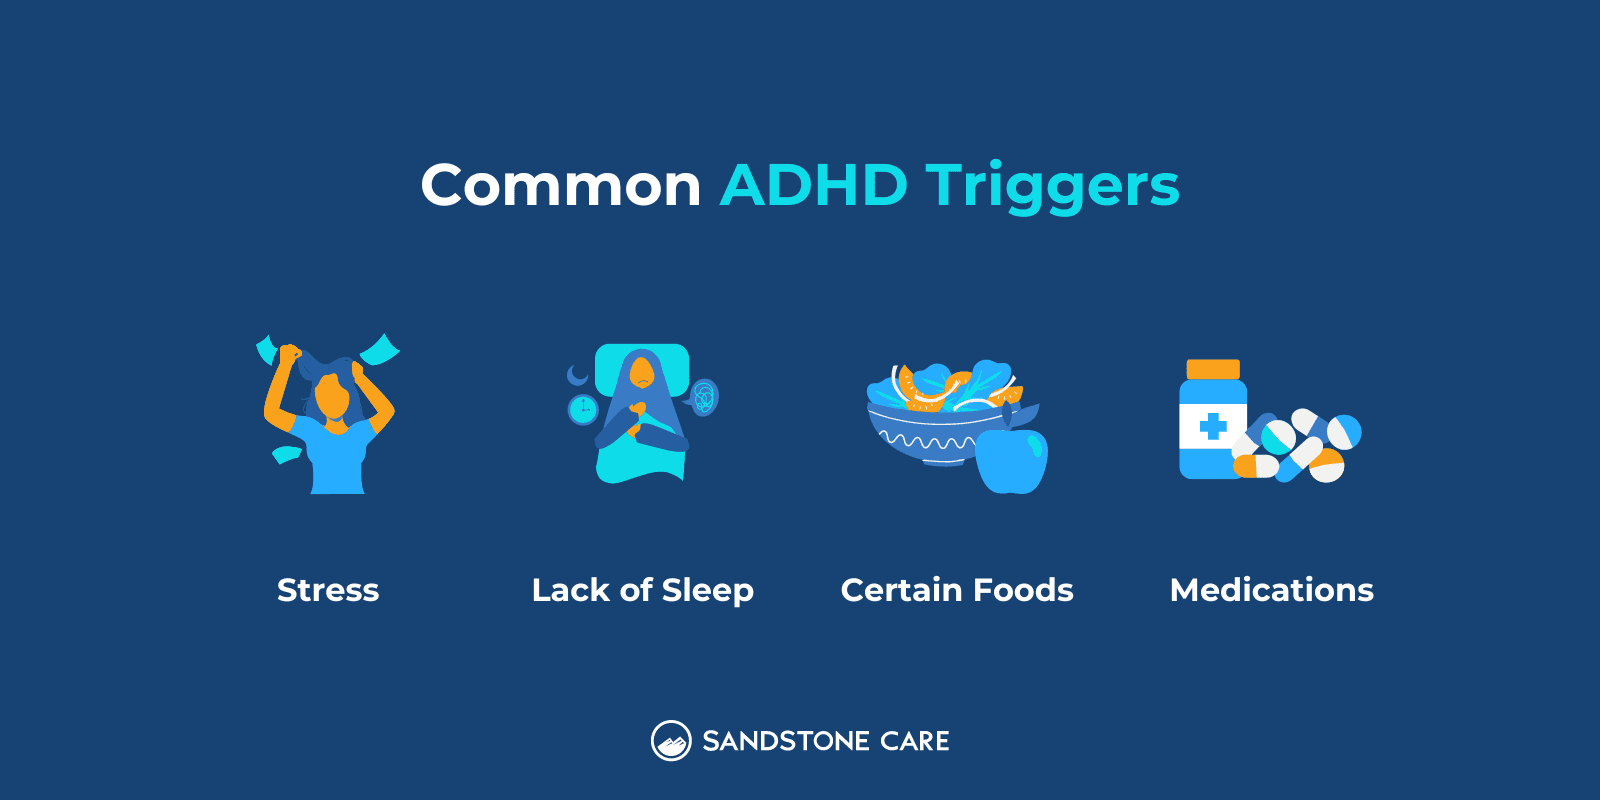 Common ADHD Triggers listed out with relevant digital graphics